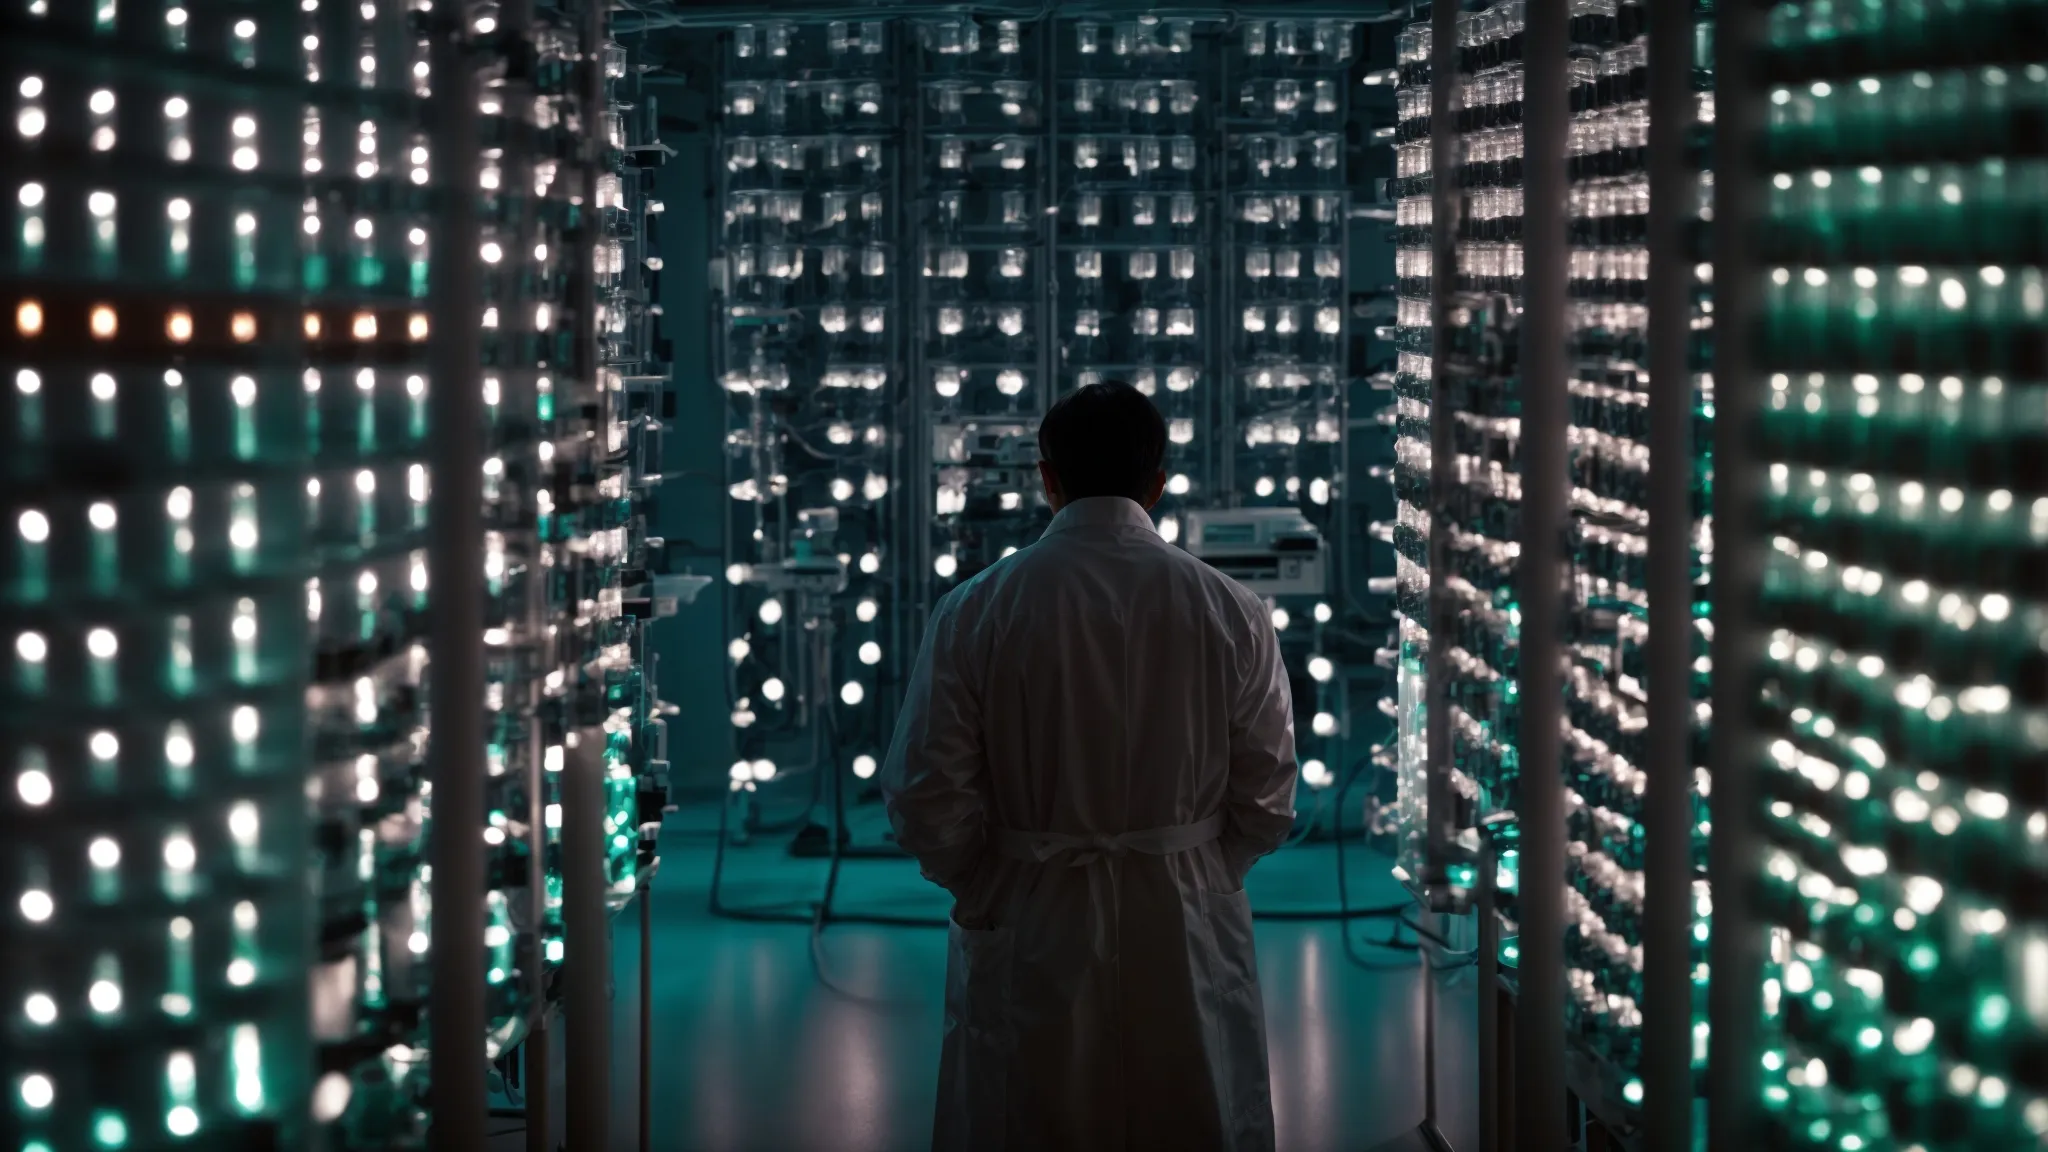 a scientist in a lab coat gazes intently at rows of test tubes containing advanced biologic therapies under the soft glow of laboratory lights.